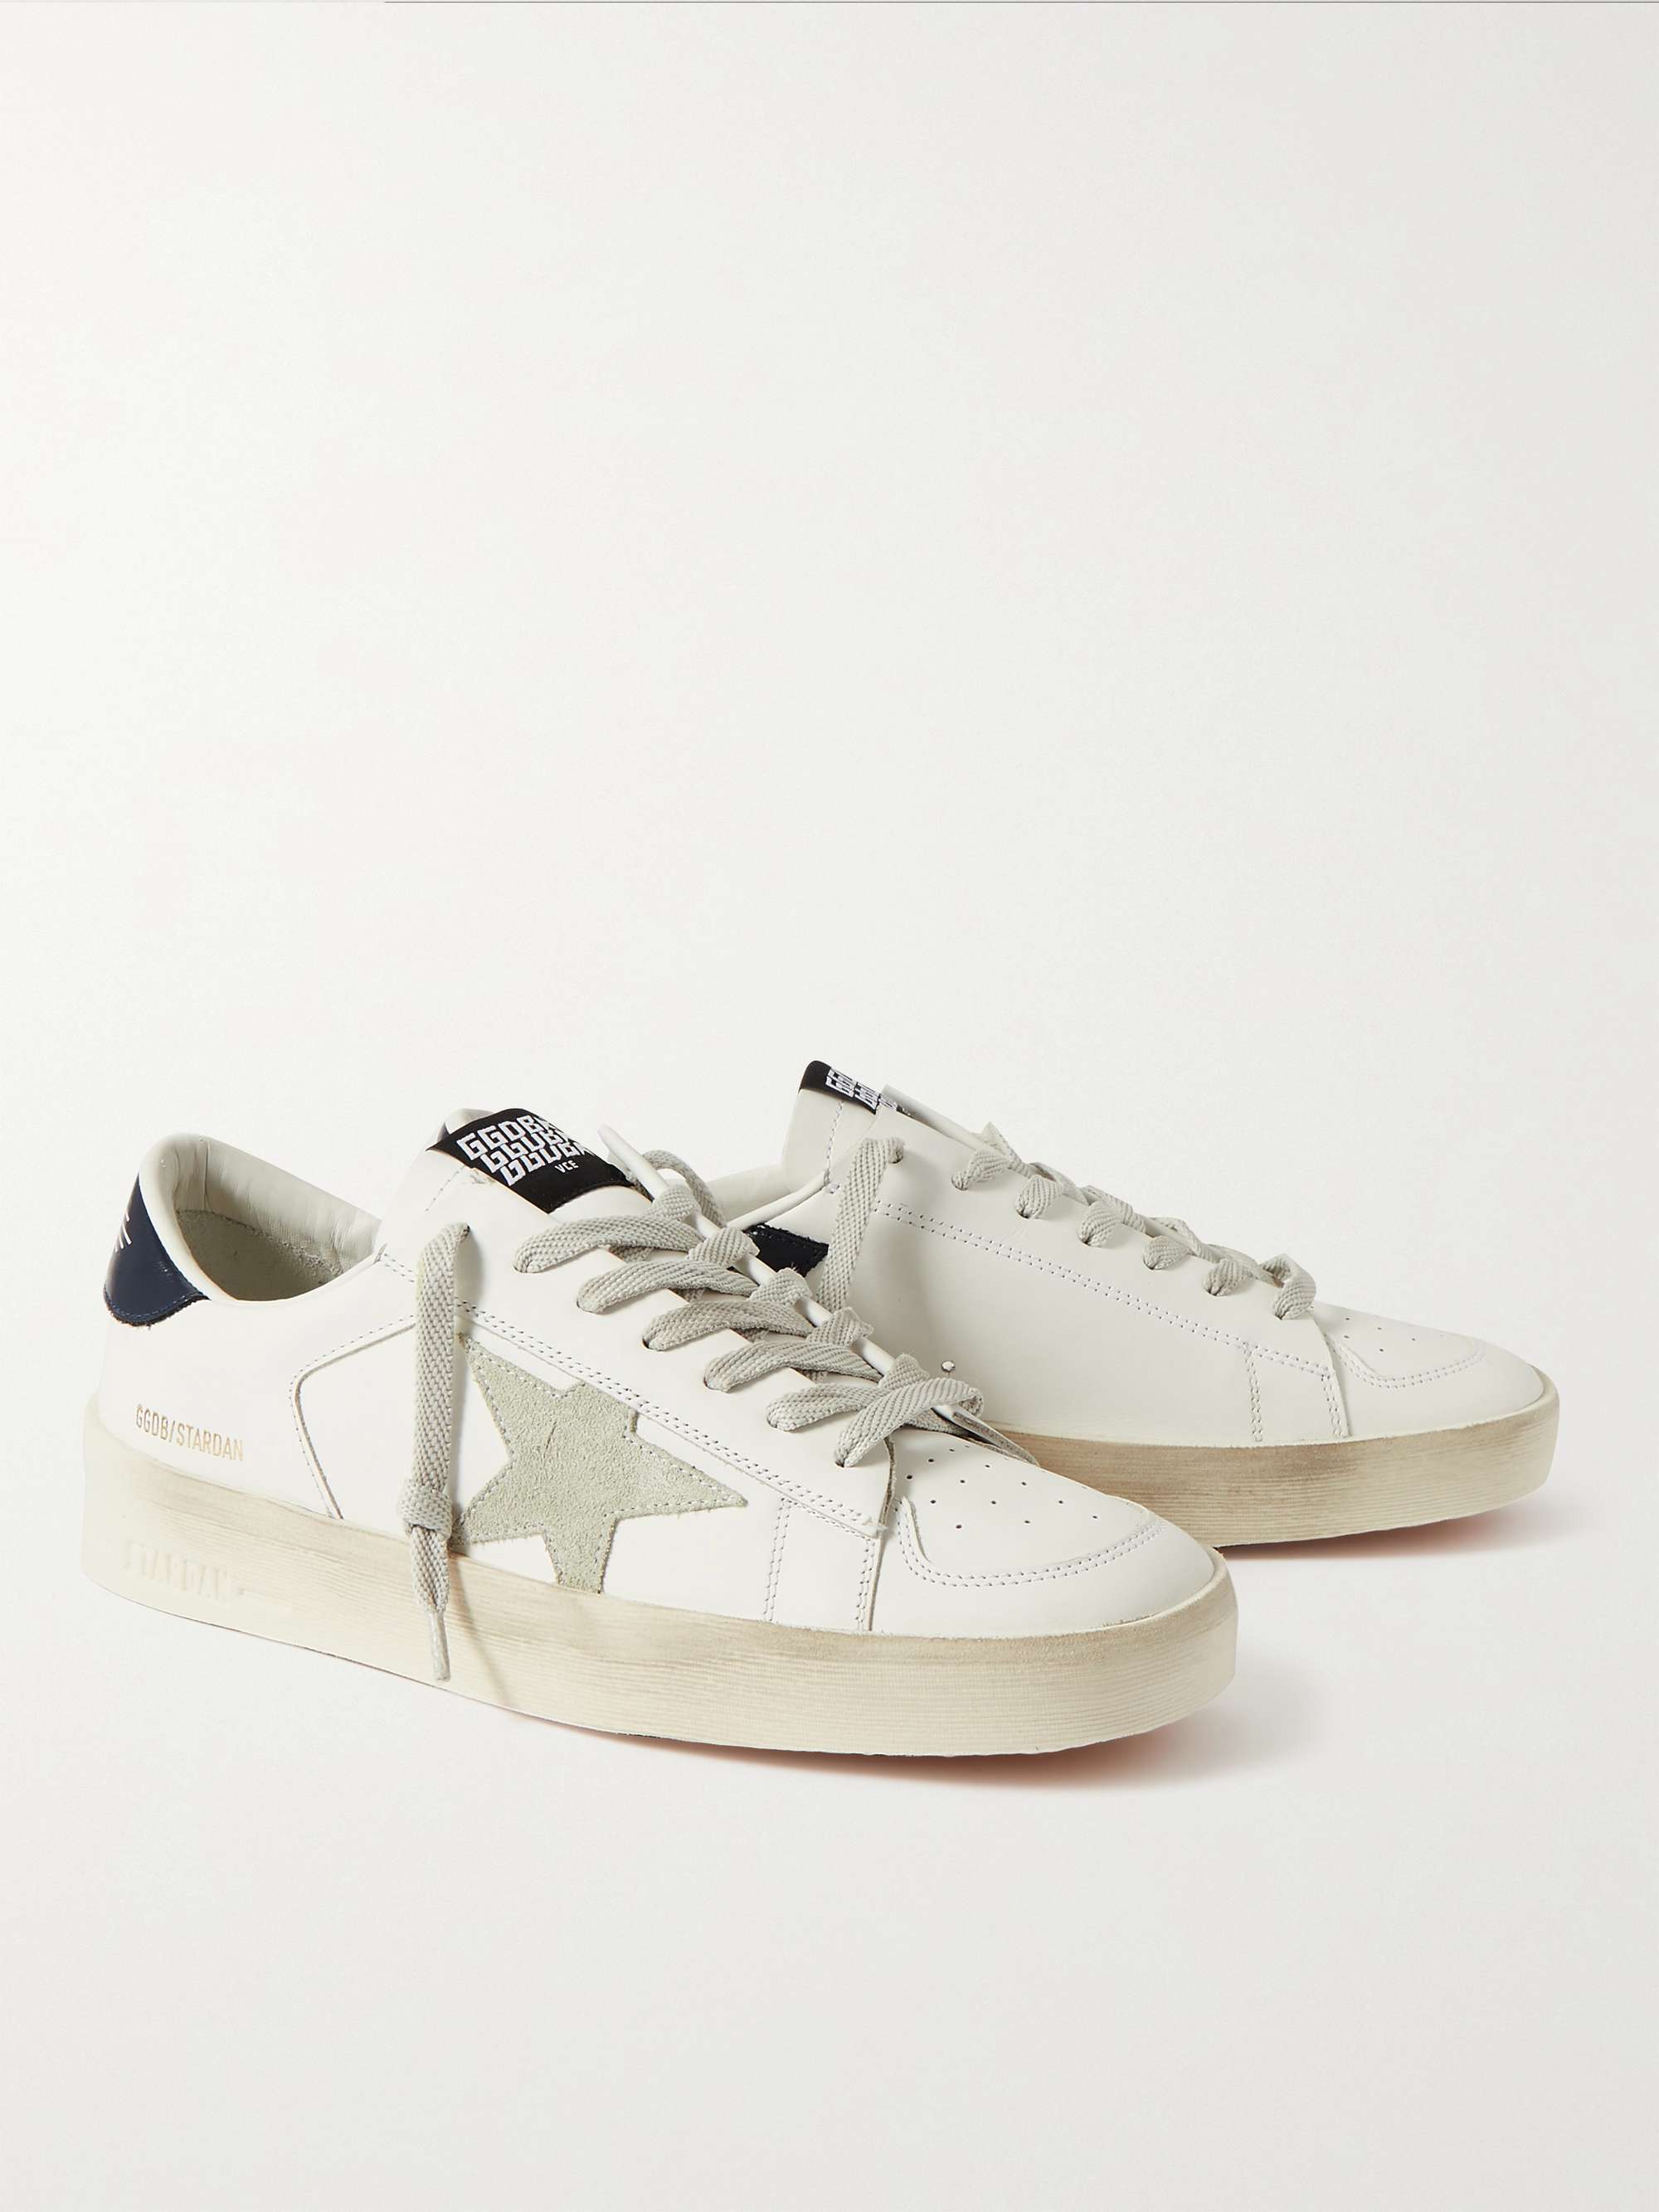 GOLDEN GOOSE Stardan Suede-Trimmed Leather Sneakers